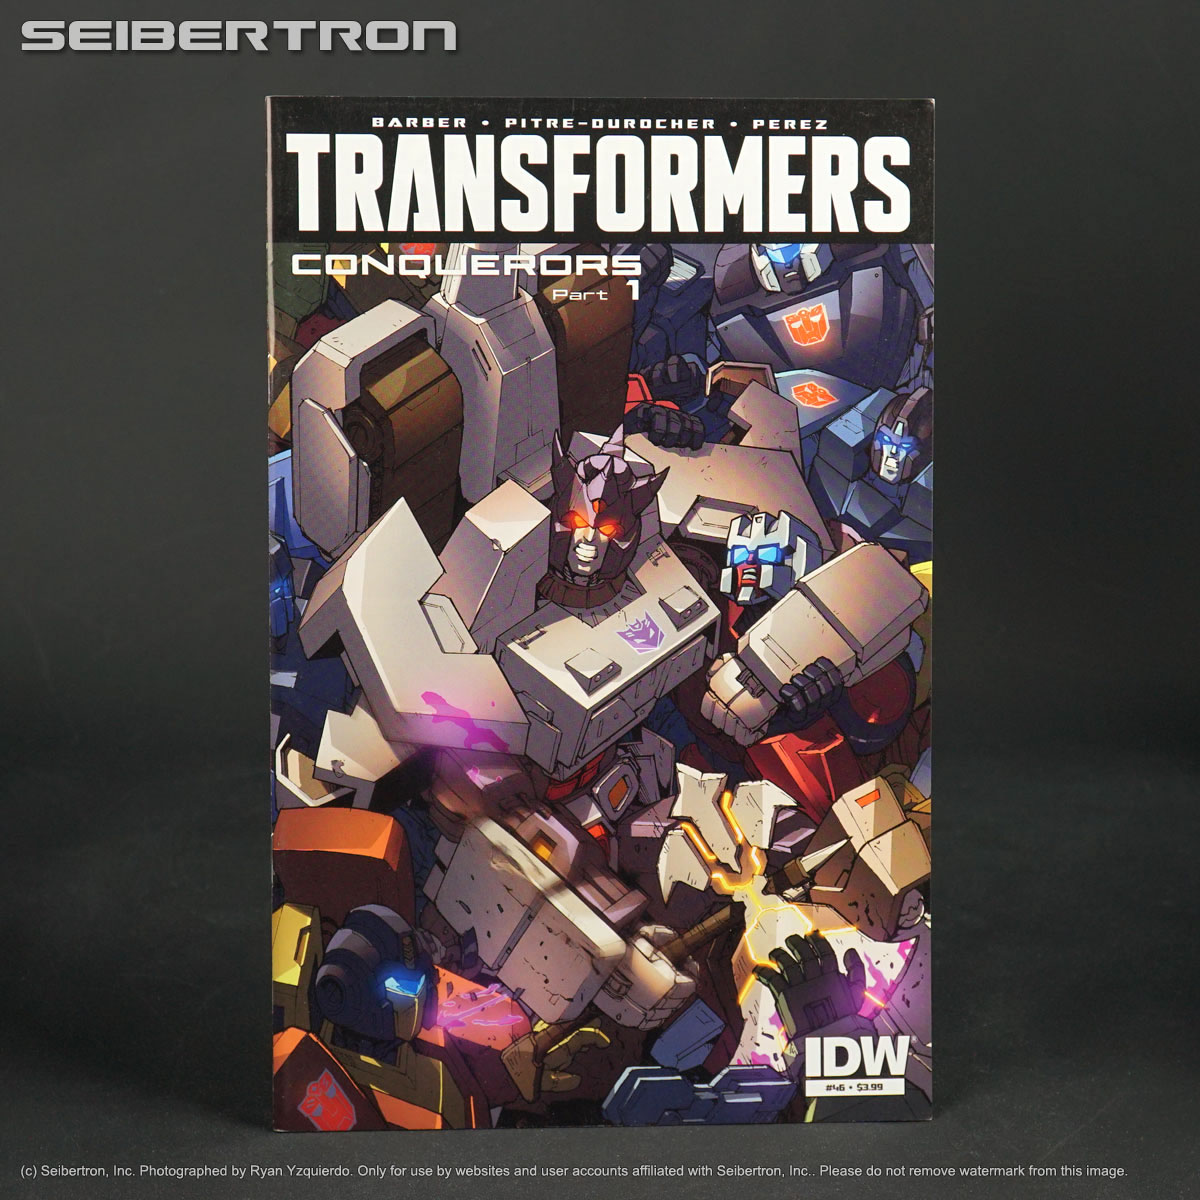 Transformers ROBOTS IN DISGUISE #46 IDW Comics 2015 (CA) Griffith (W) Barber